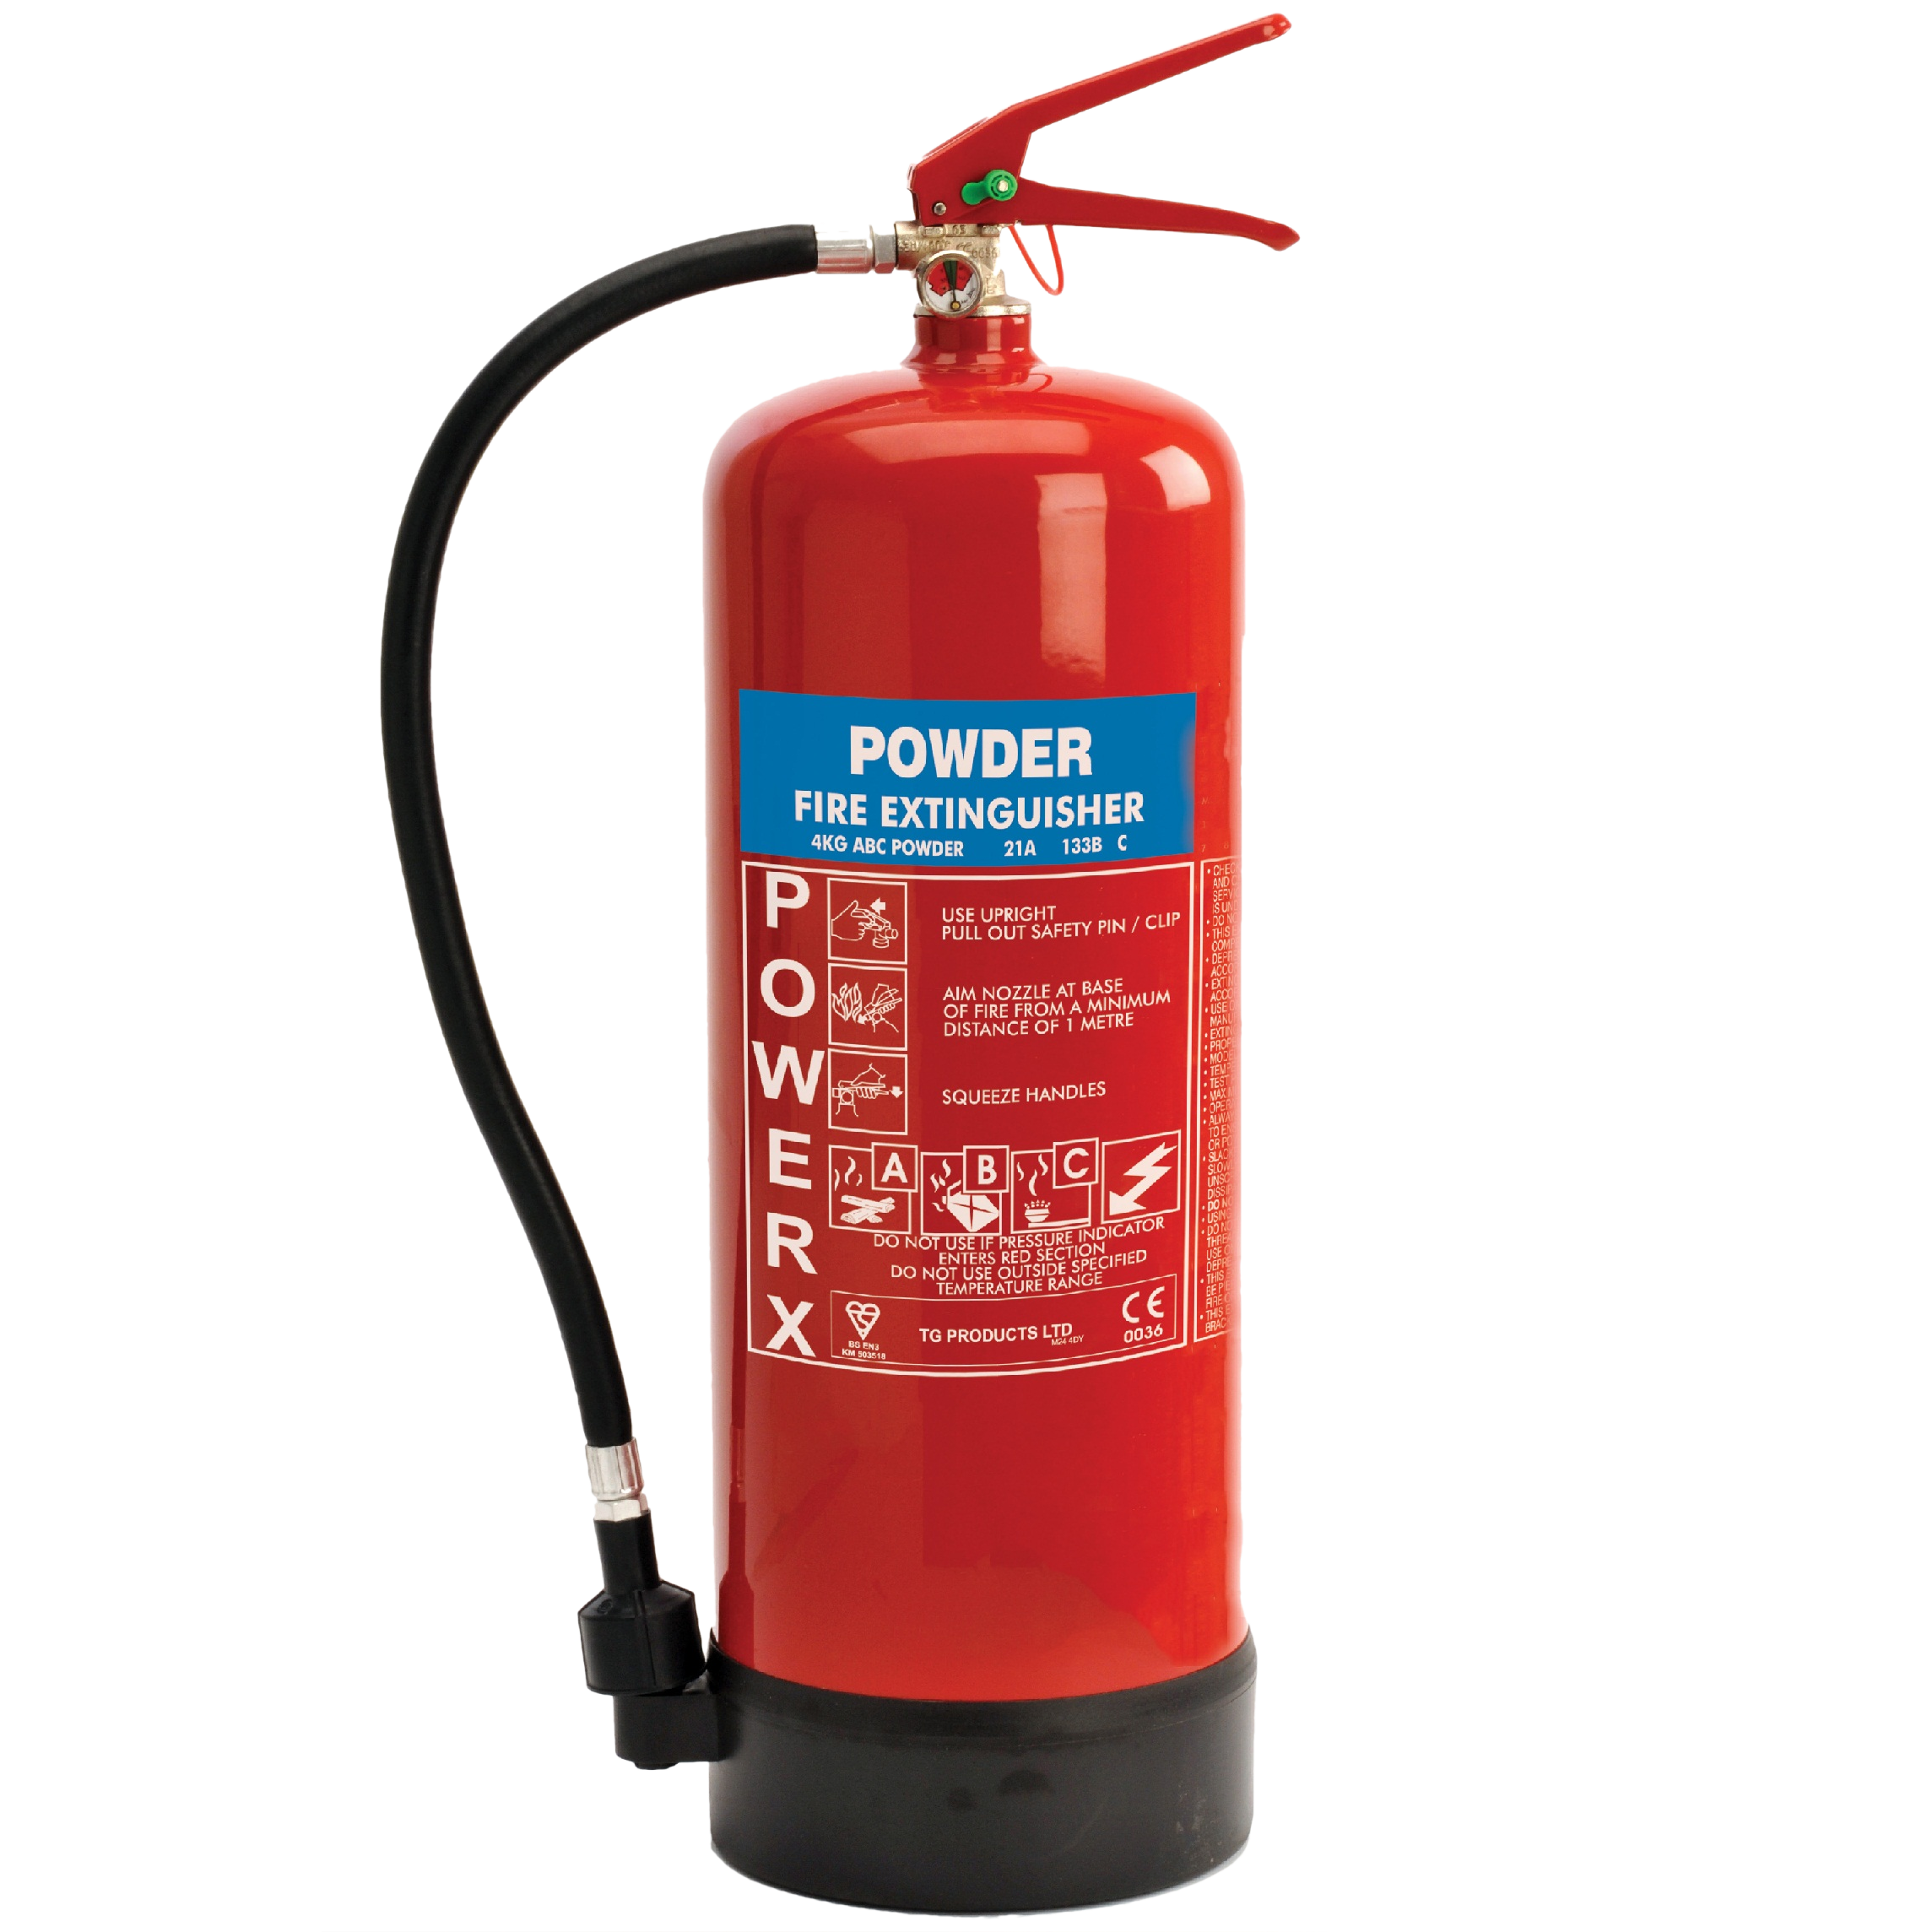 Fire Extinguisher Background PNG Image